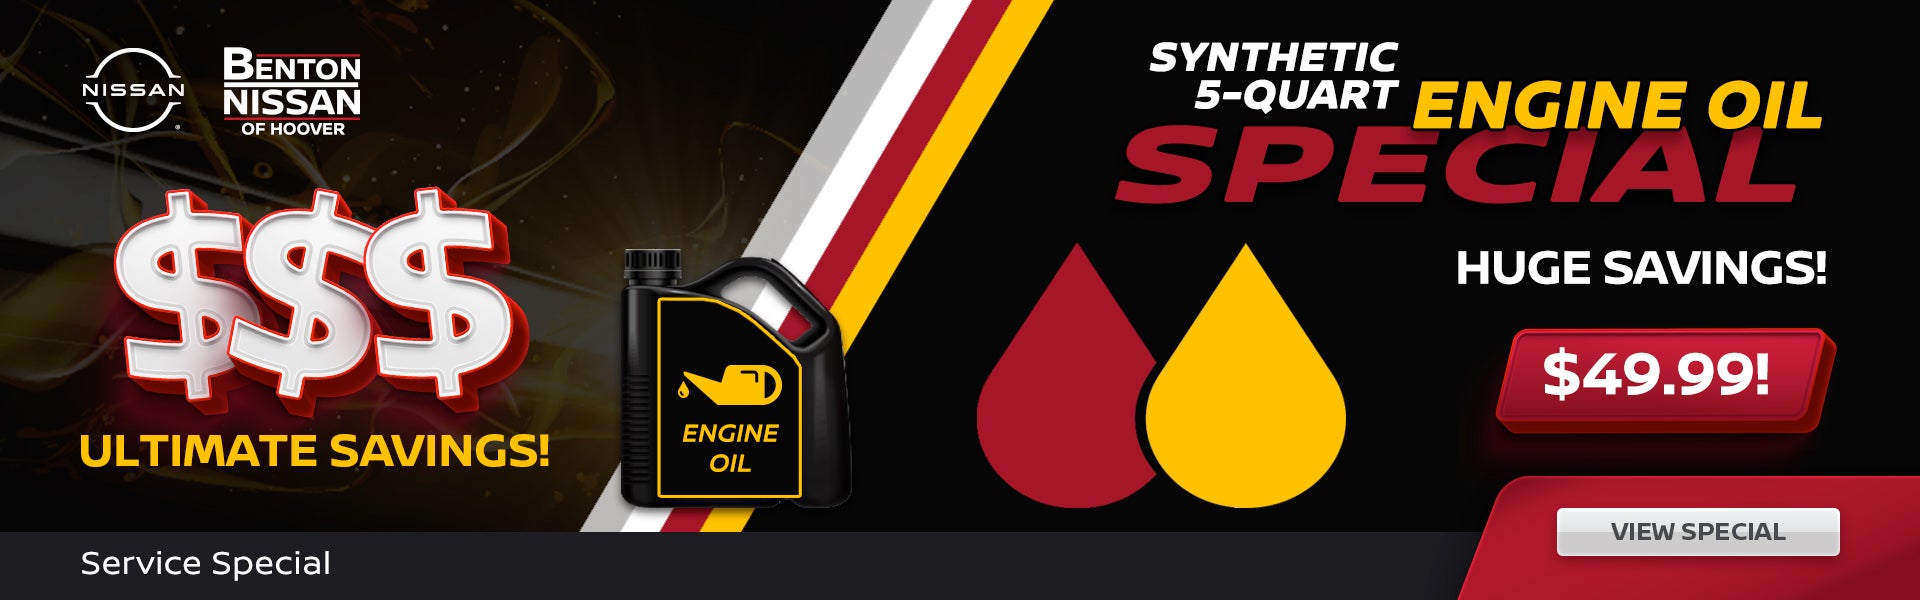 Synthetic 5-Quart Engine Oil Special